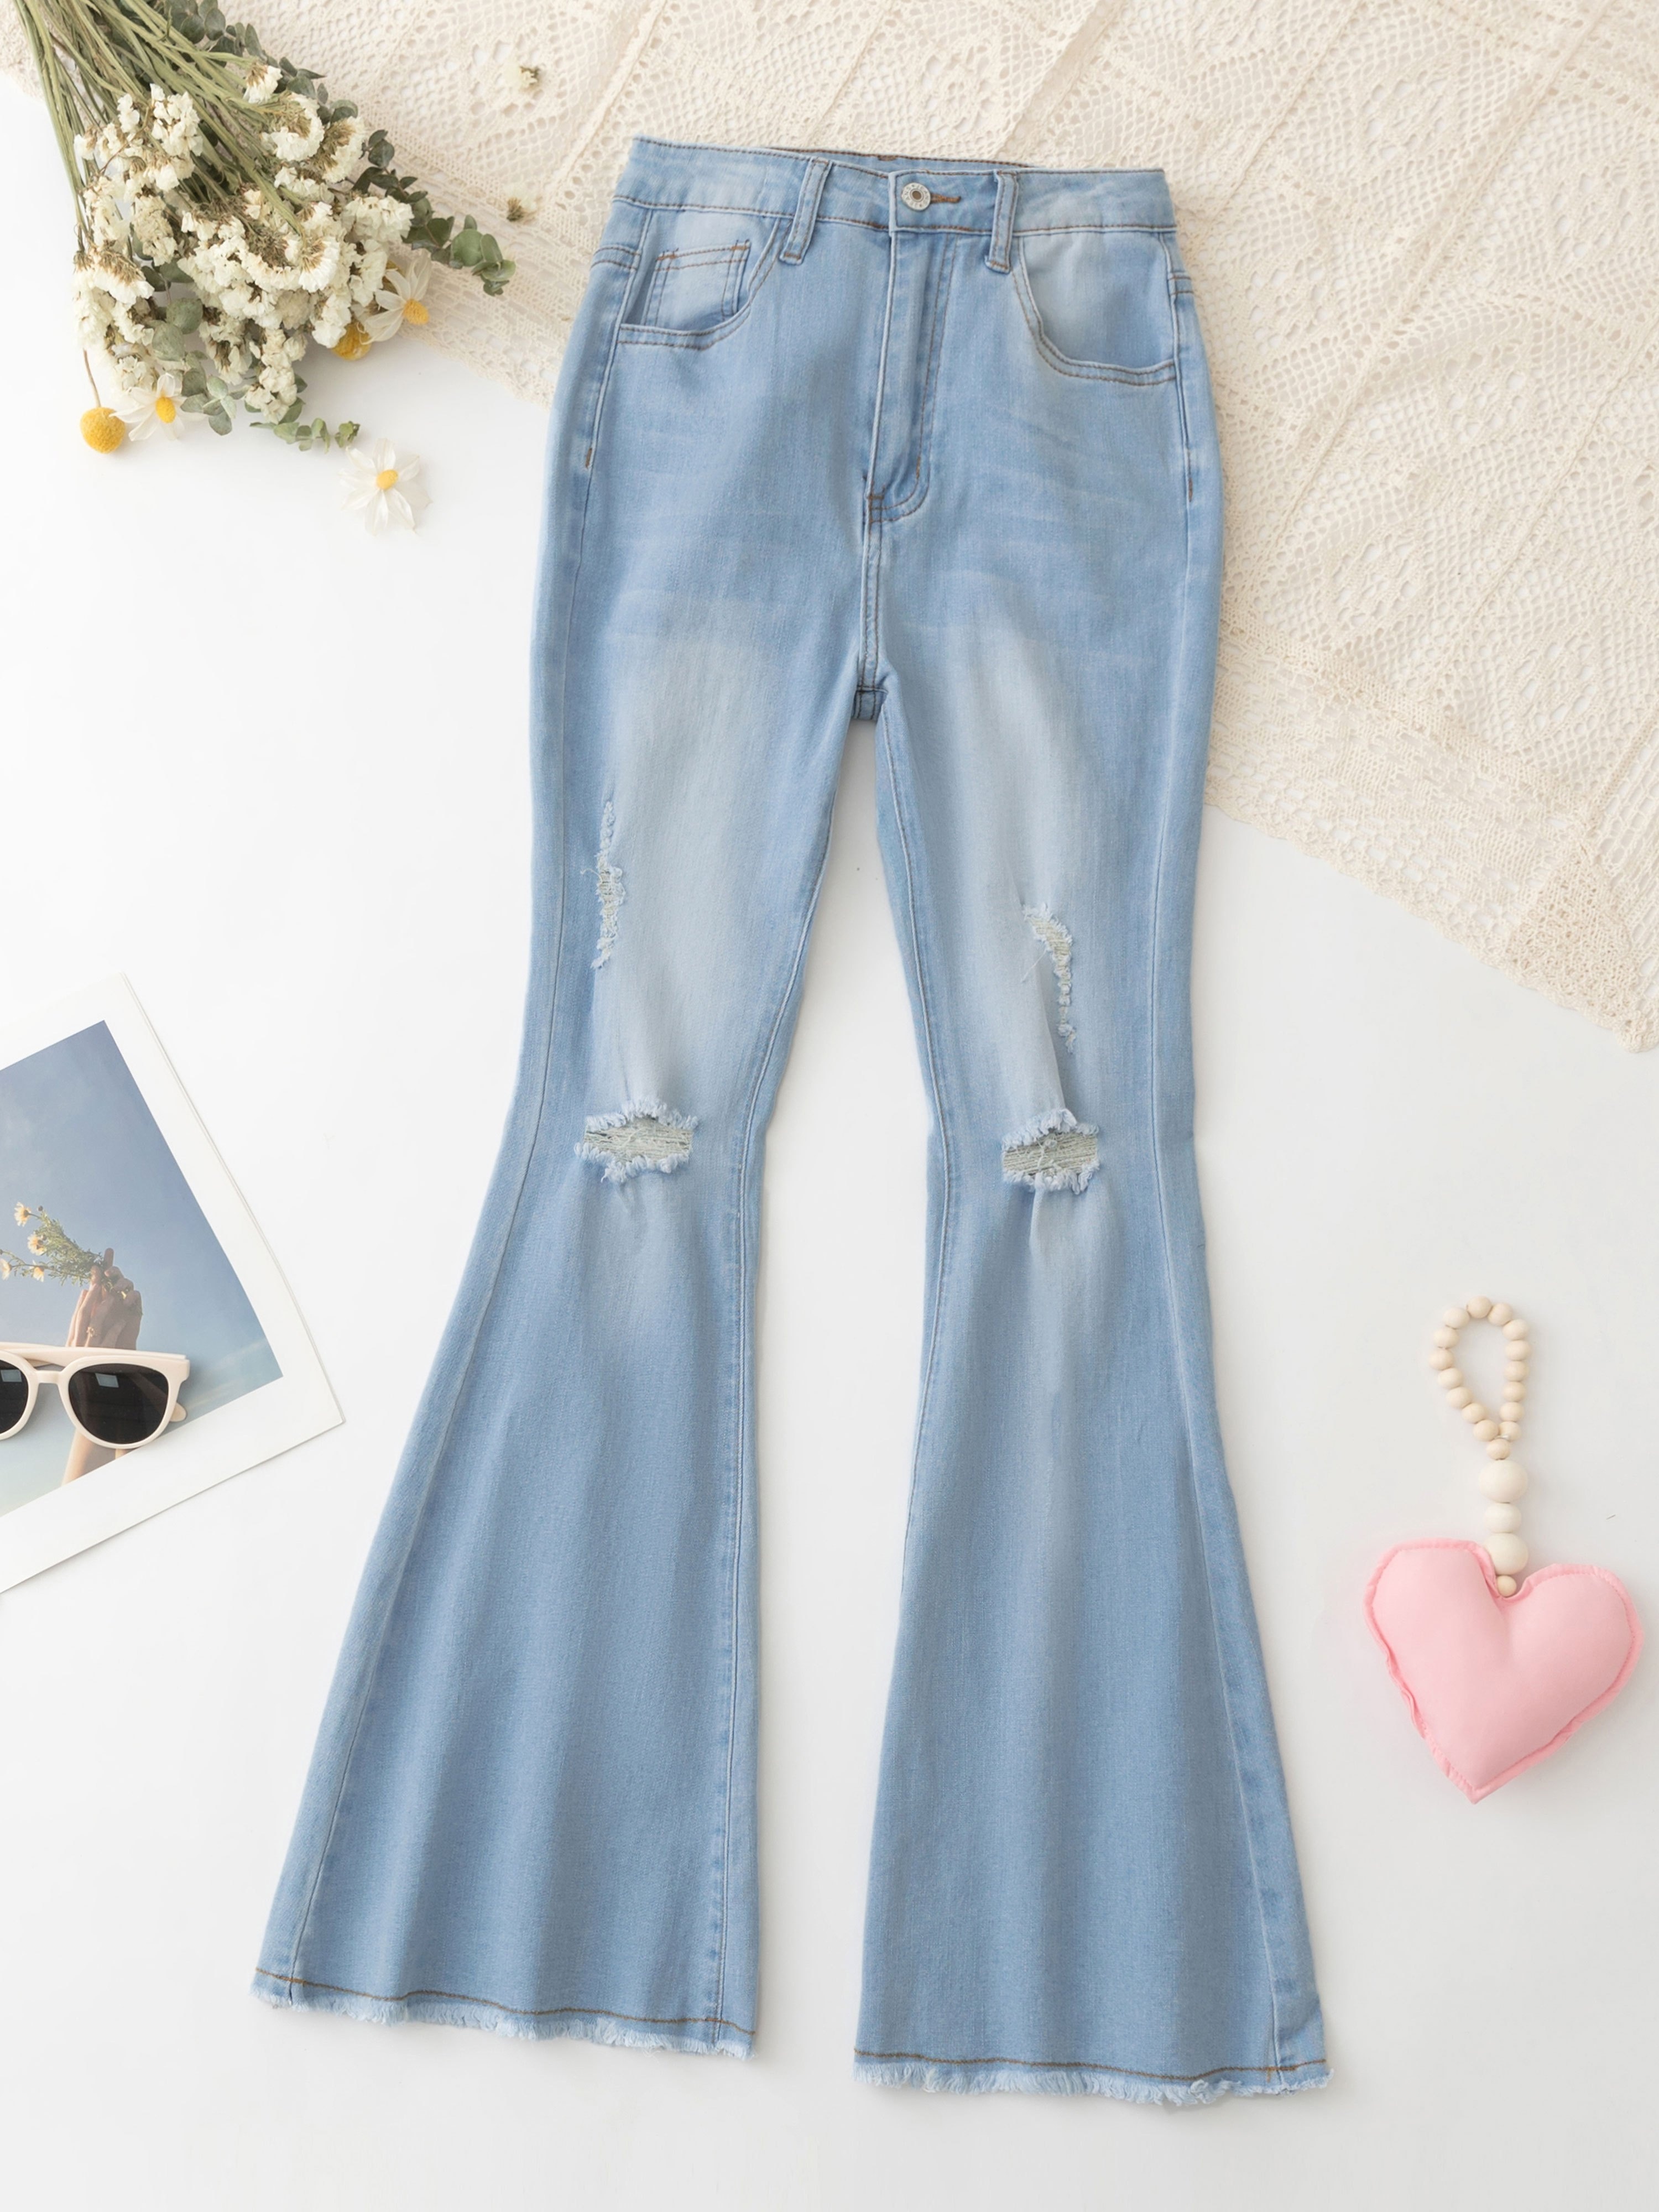 bootcut jeans  Spring outfits for teen girls, How to wear bootcut jeans,  Outfits for teens